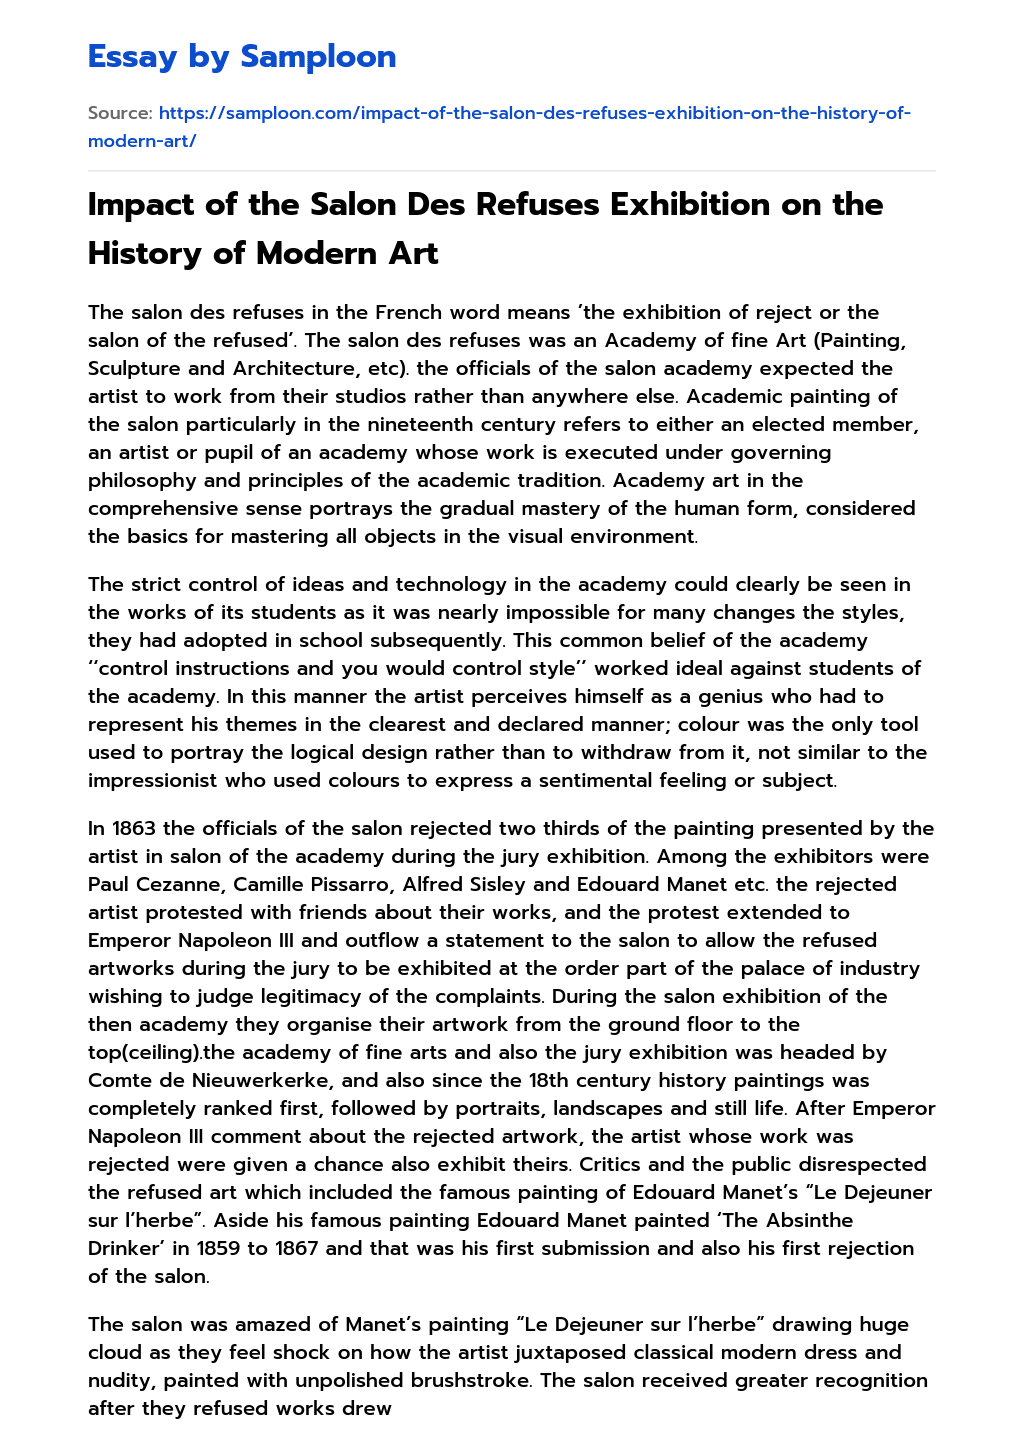 Impact of the Salon Des Refuses Exhibition on the History of Modern Art Argumentative Essay essay